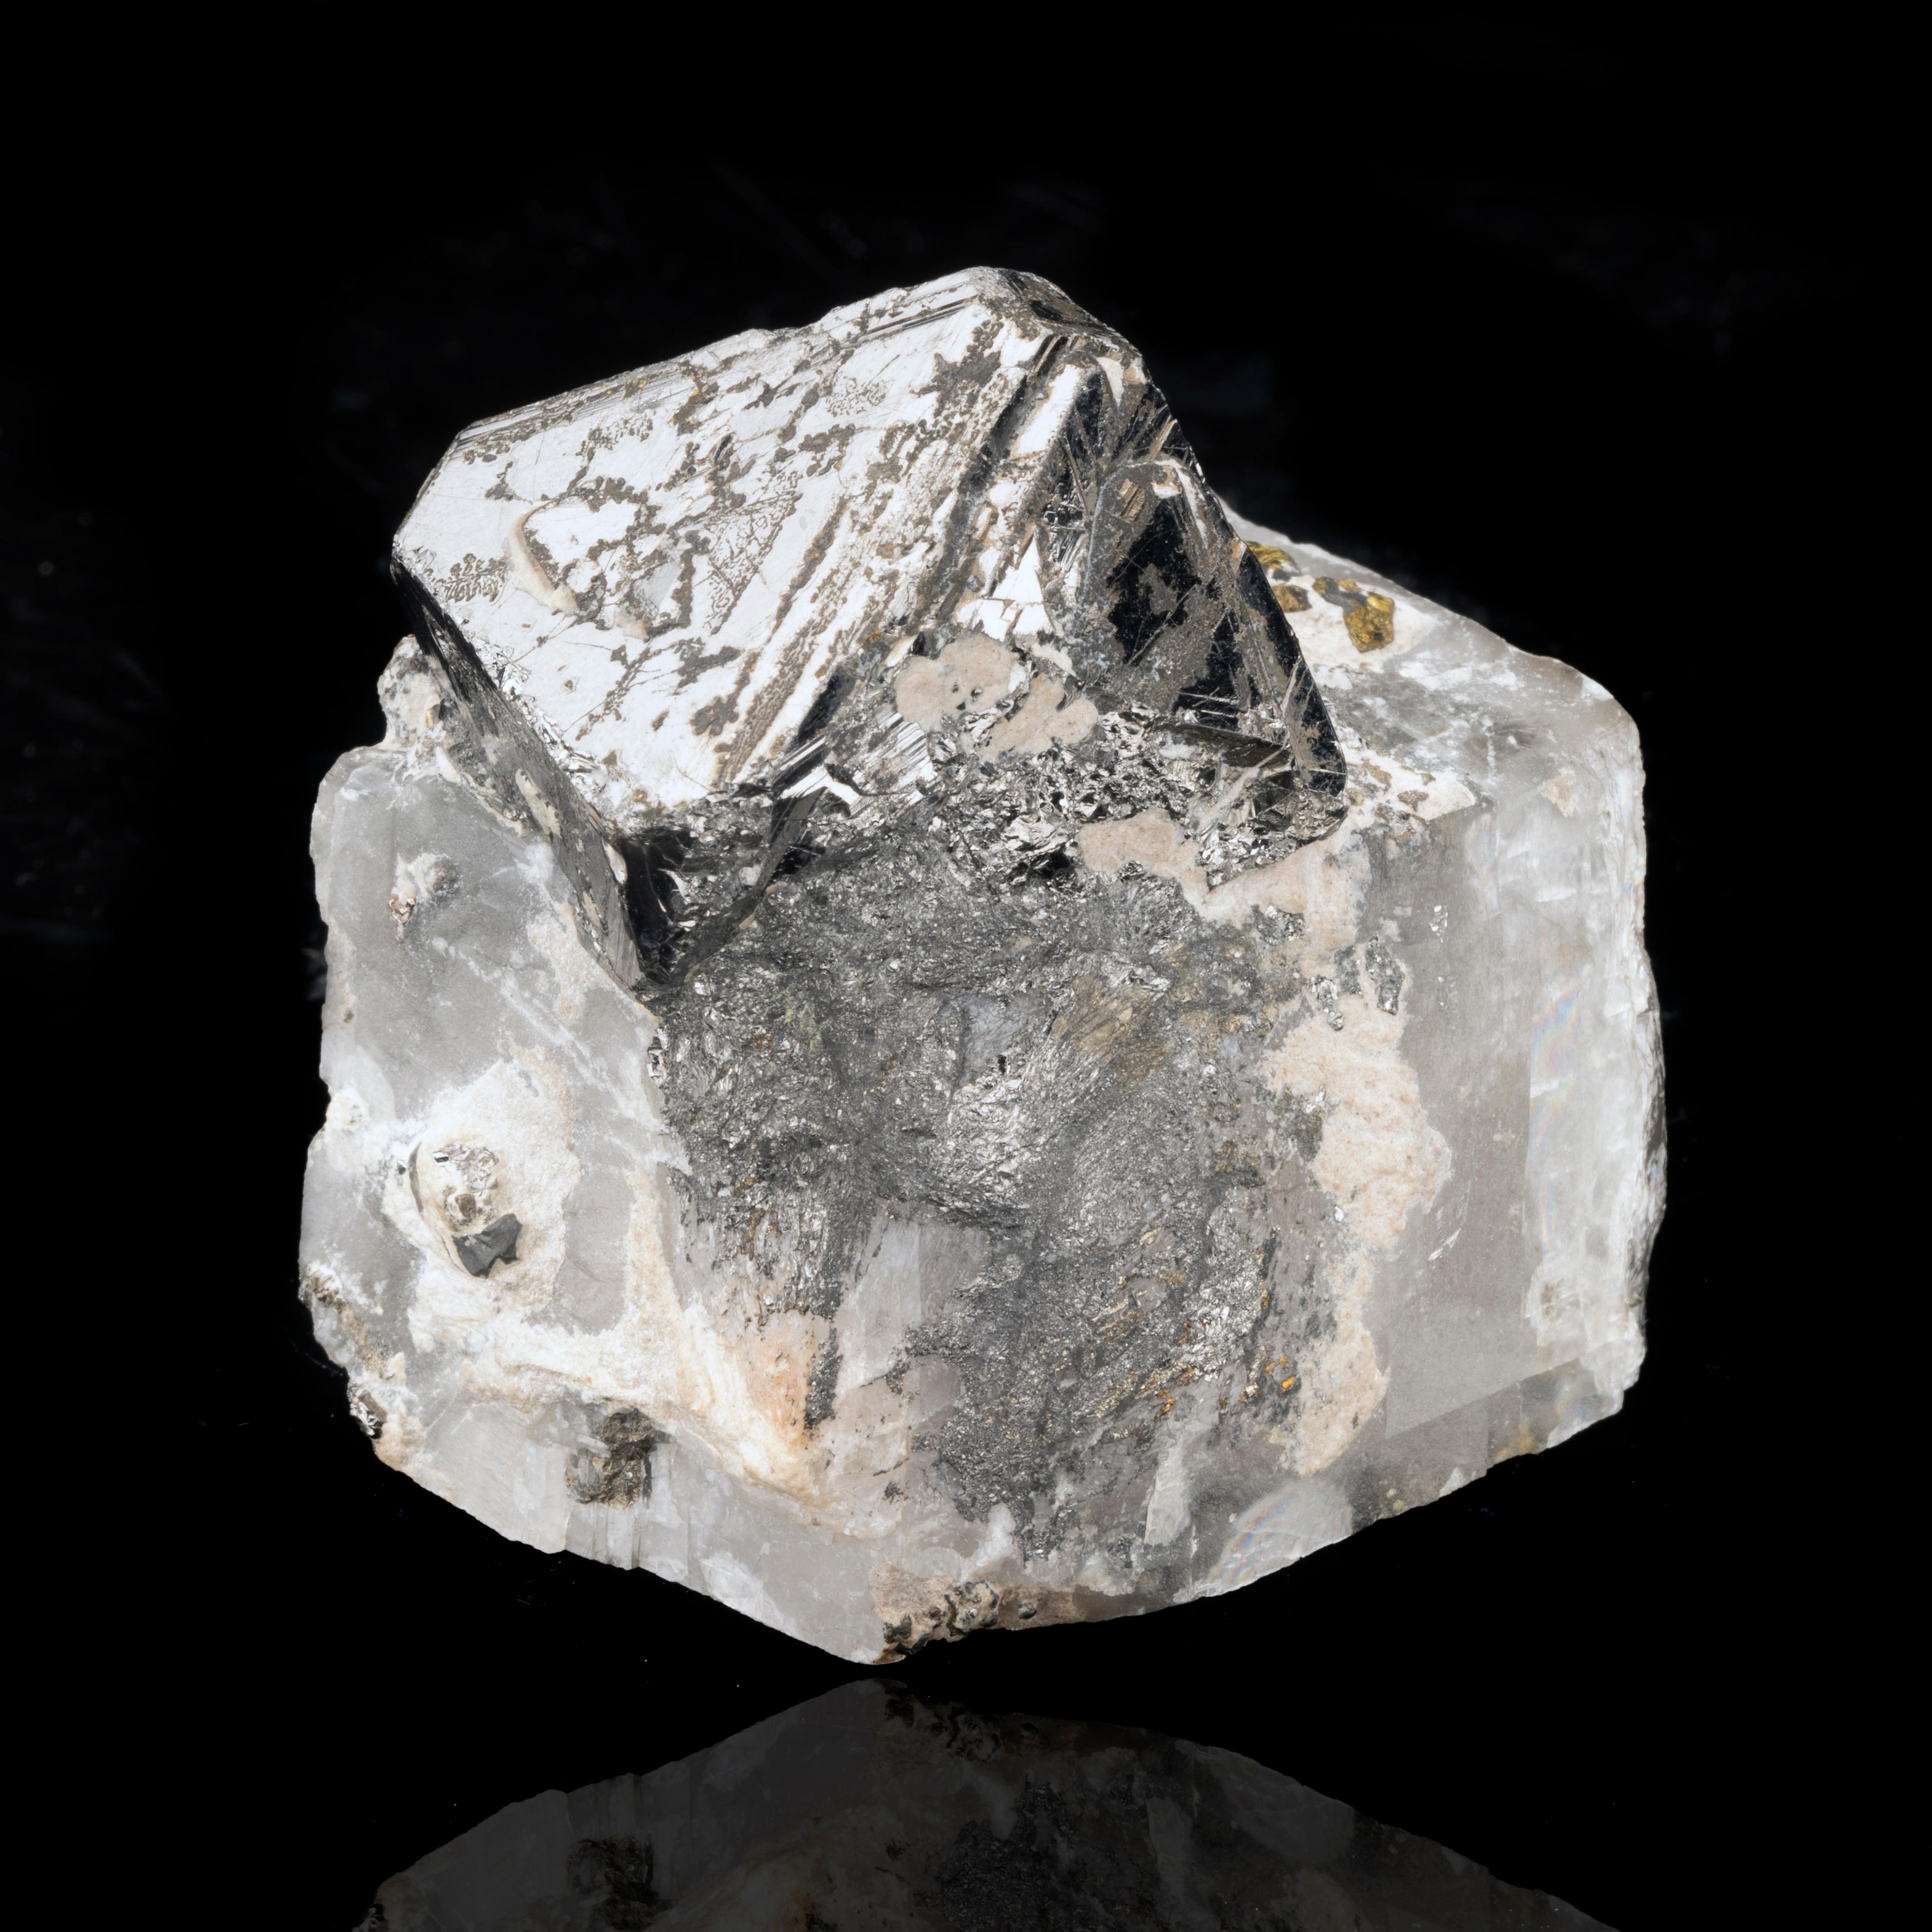 This combination specimen from the DRC features a metallic etched, octahedral carrollite on a fascinating matrix comprised almost entirely of a single calcite crystal growing in a rhombohedral habit with four whole faces showing zero evidence of any